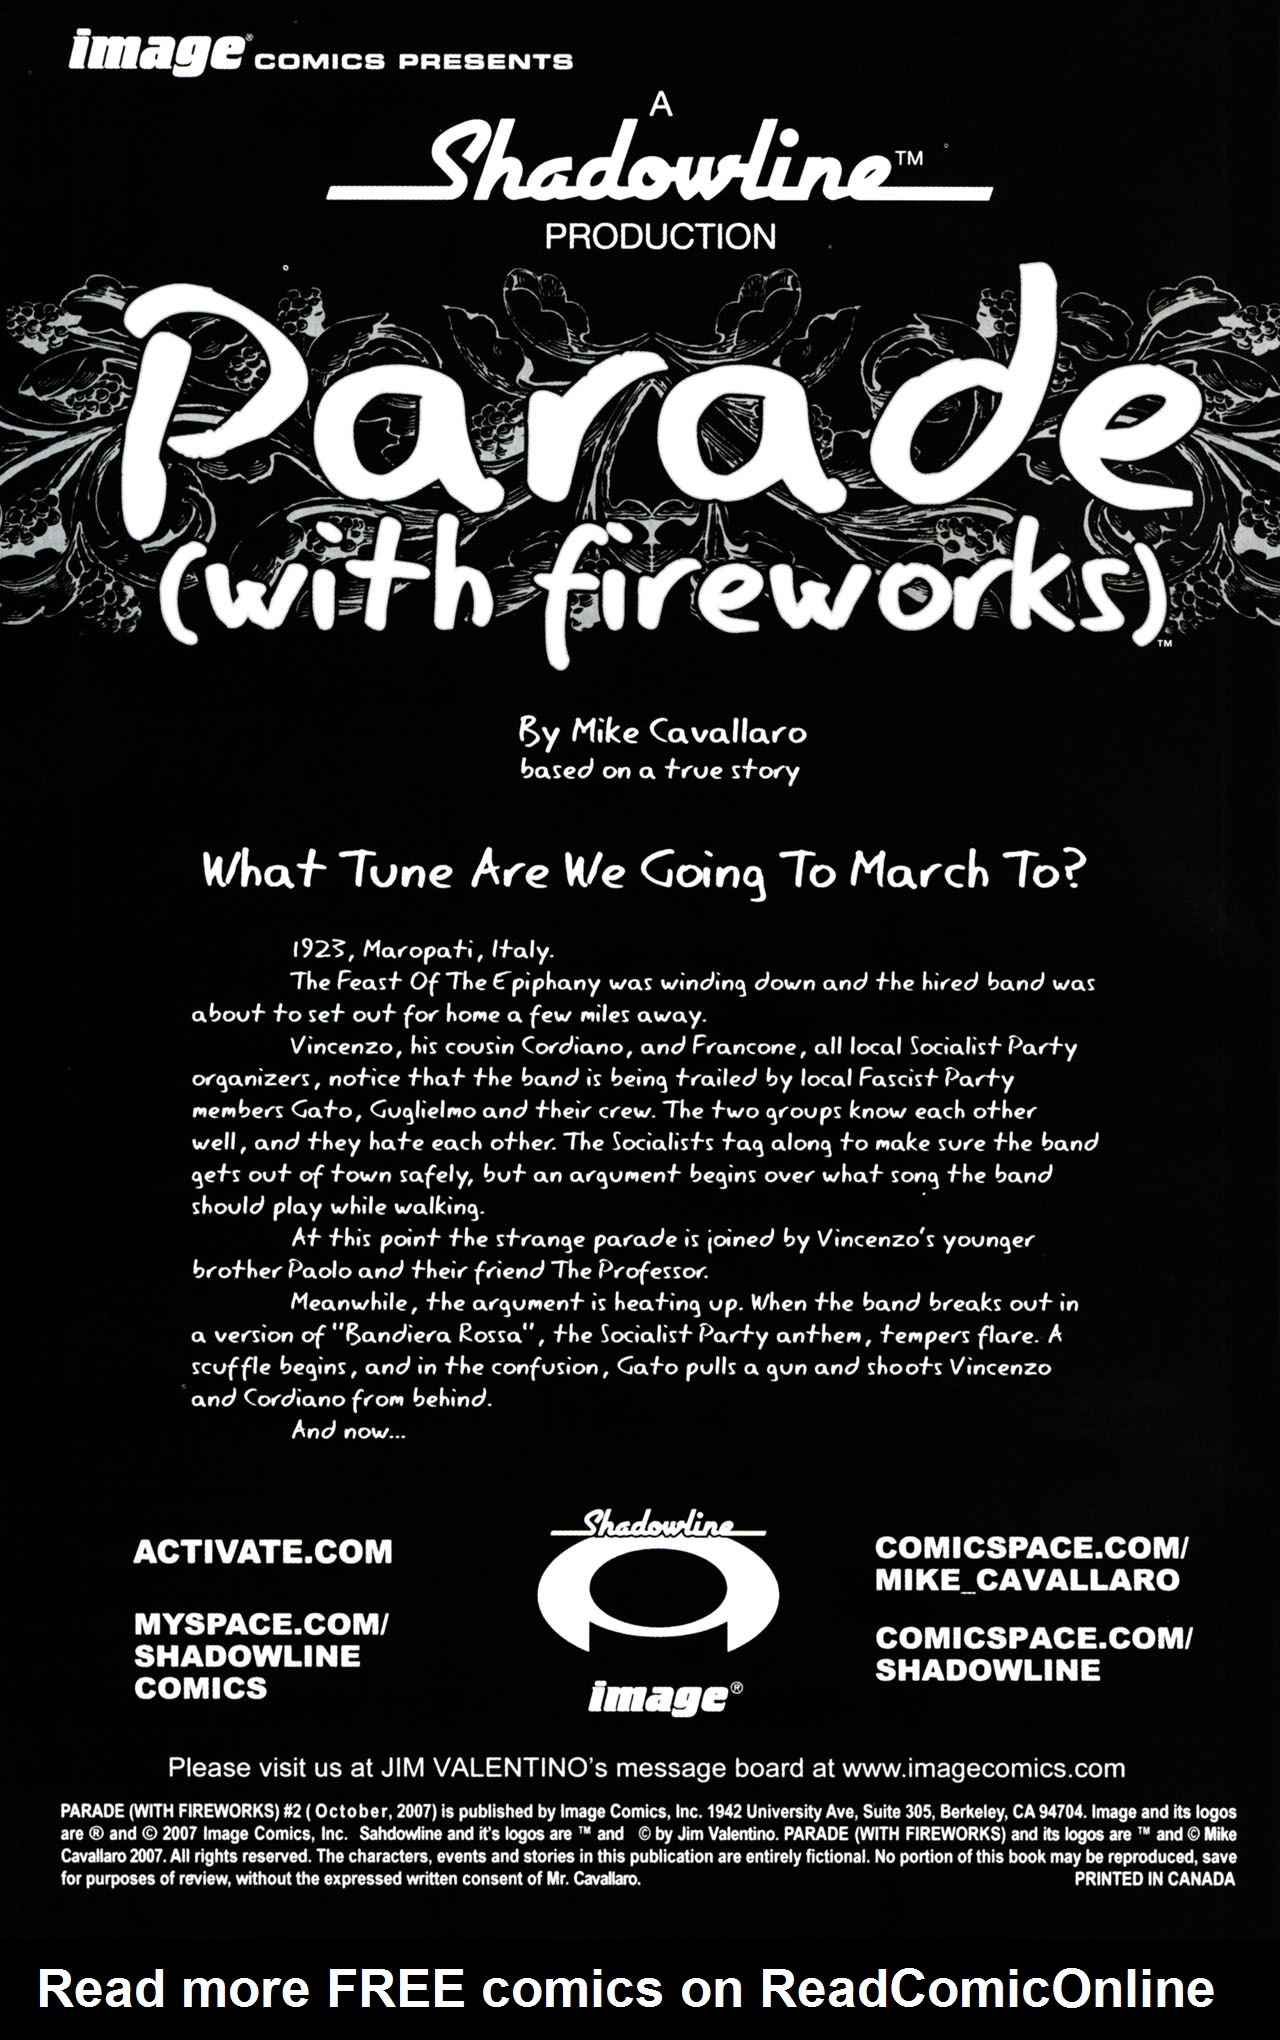 Read online Parade (with fireworks) comic -  Issue #2 - 2